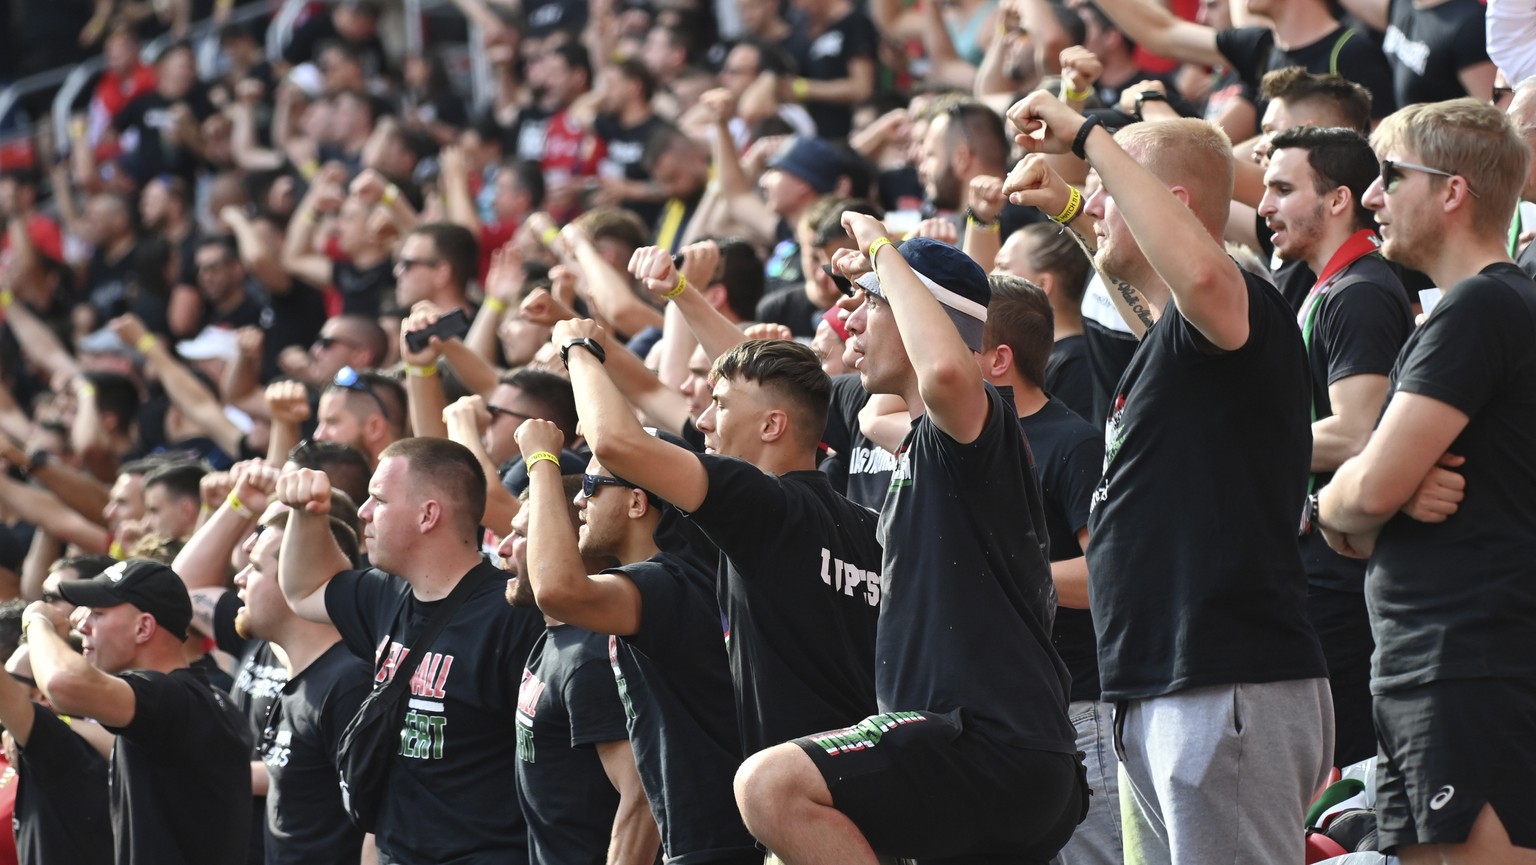 Hungary fans cheer their team before the Euro 2020 soccer championship group F soccer match between Hungary and Portugal at the Puskas Arena in Budapest, Hungary, Tuesday, June 15, 2021. (Tibor Illyes ...